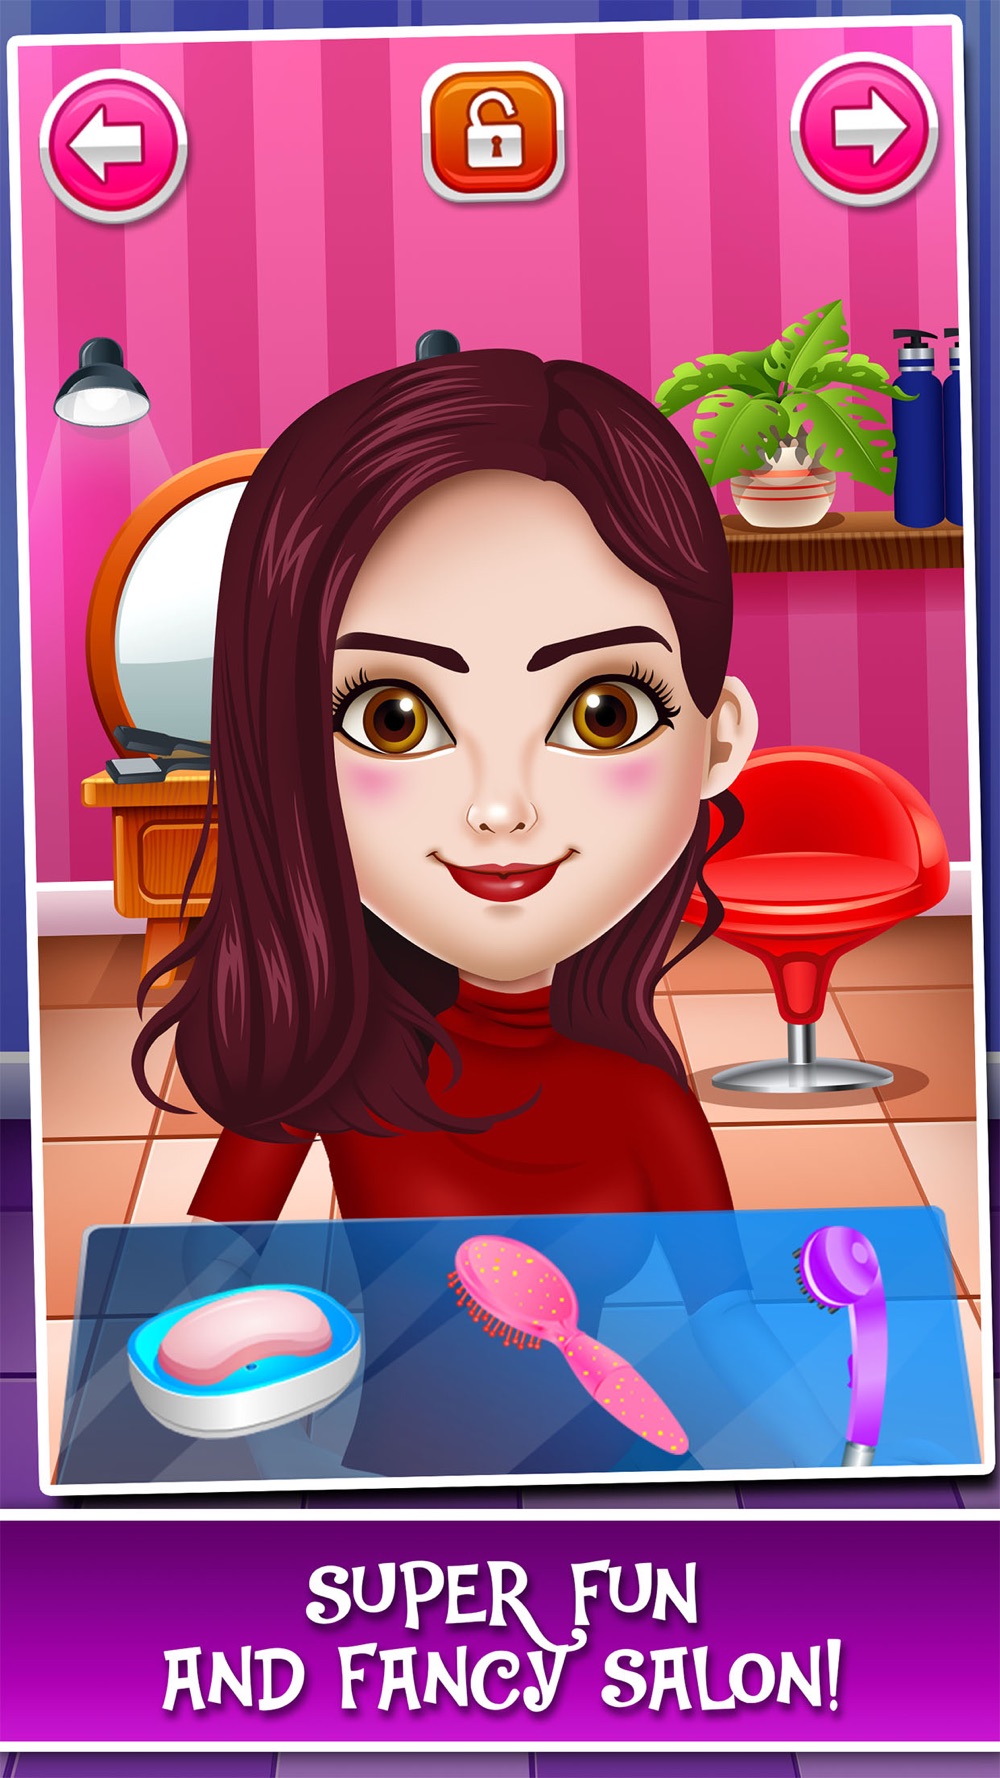 High School Prom Salon: Spa, Makeover, and Make-Up Beauty Game for Little Kids (Boys & Girls)